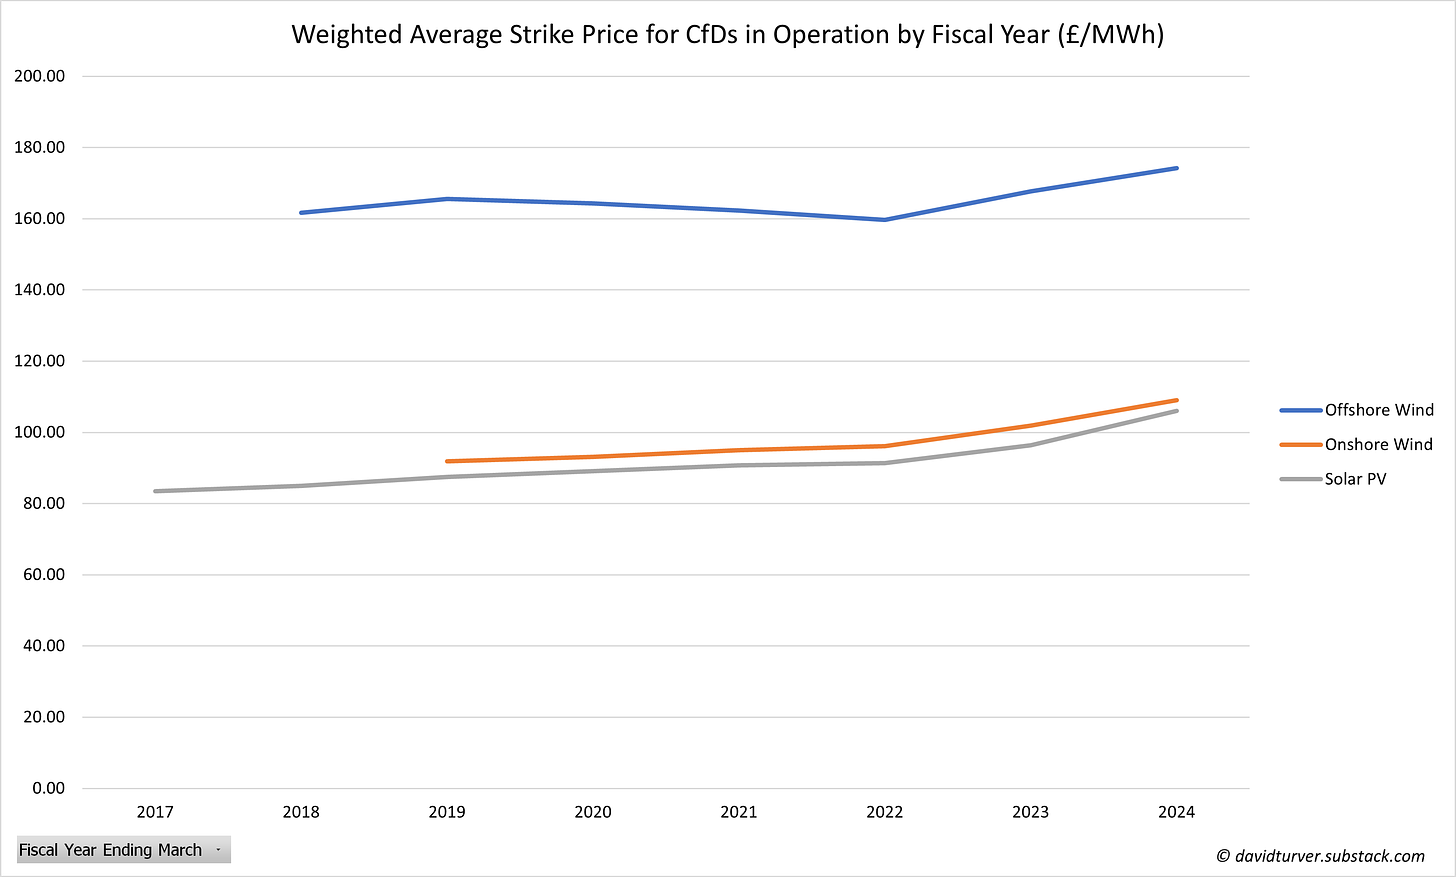 Figure 4 - Wieghted Average Strike Price of Operational CfDs for Wind and Solar (£ per MWh)